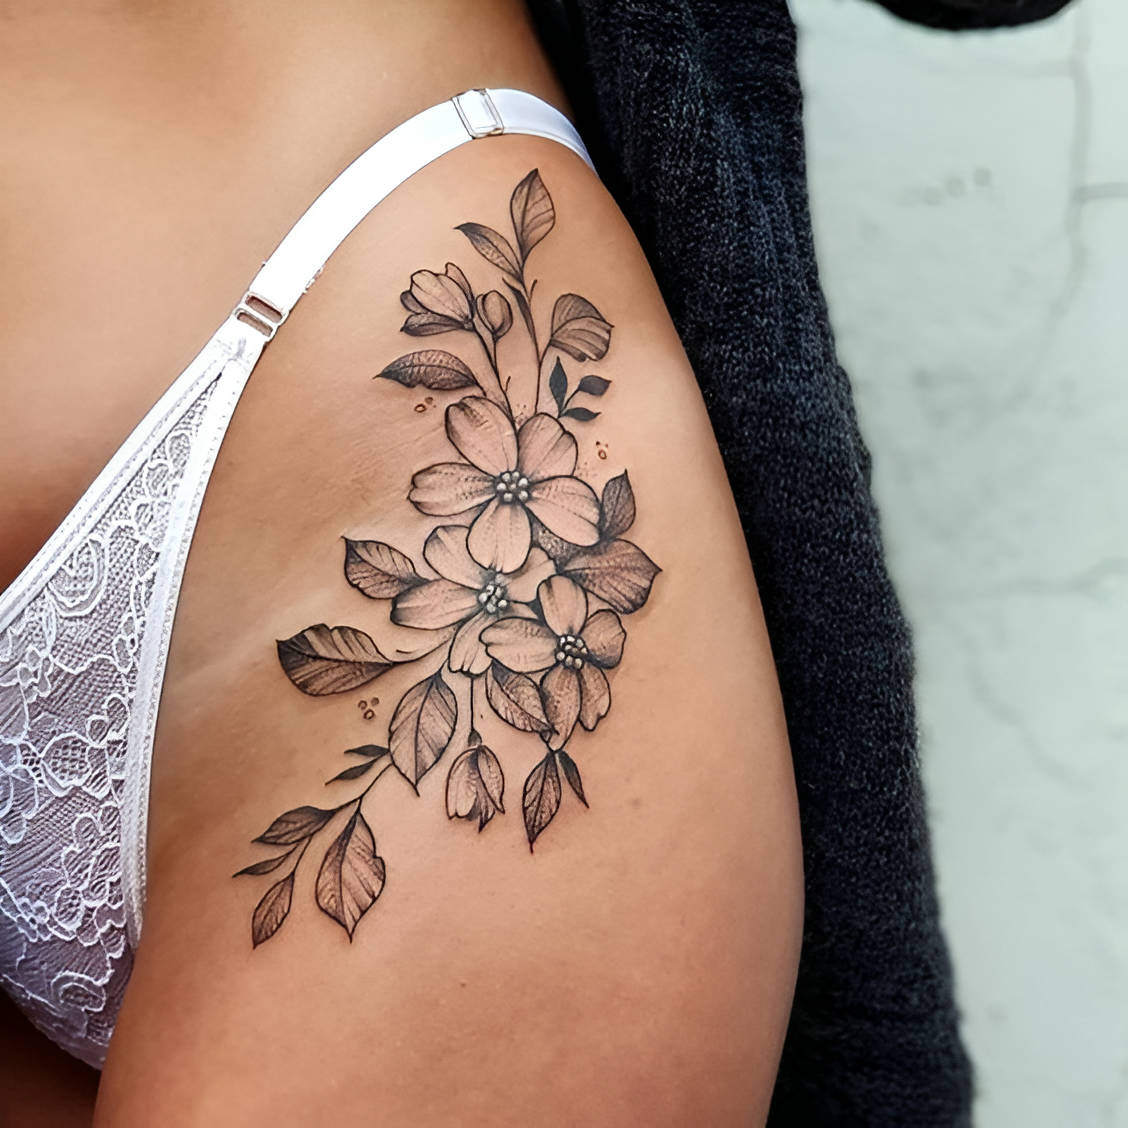 Sexy Tattoo Ideas For Women With Flower Design